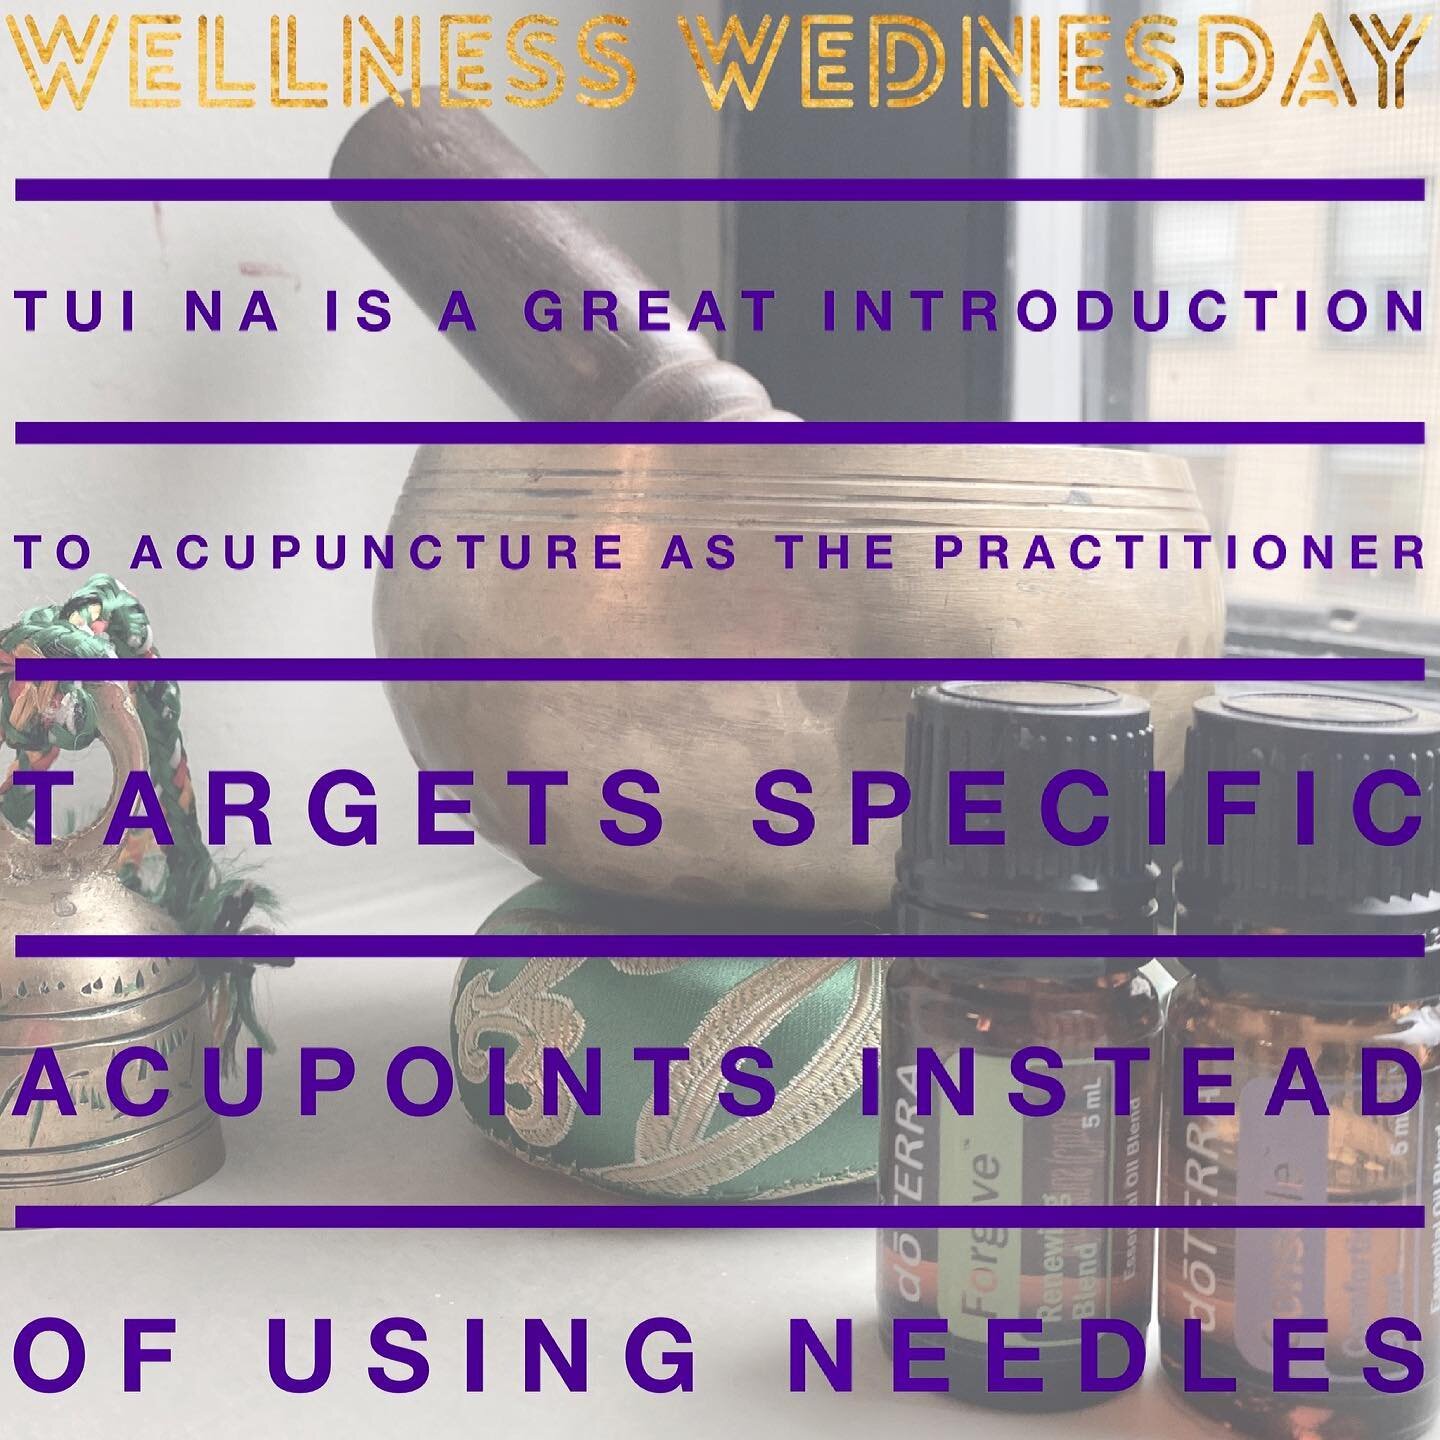 Wellness Wednesday tip!! This week as we focus on #faith @rosediamondacupuncture would like to help you build that Faith in holistic healing! 
💜
If you&rsquo;re not quite ready for acupuncture have you considered Tui Na massage? It&rsquo;s a stimula